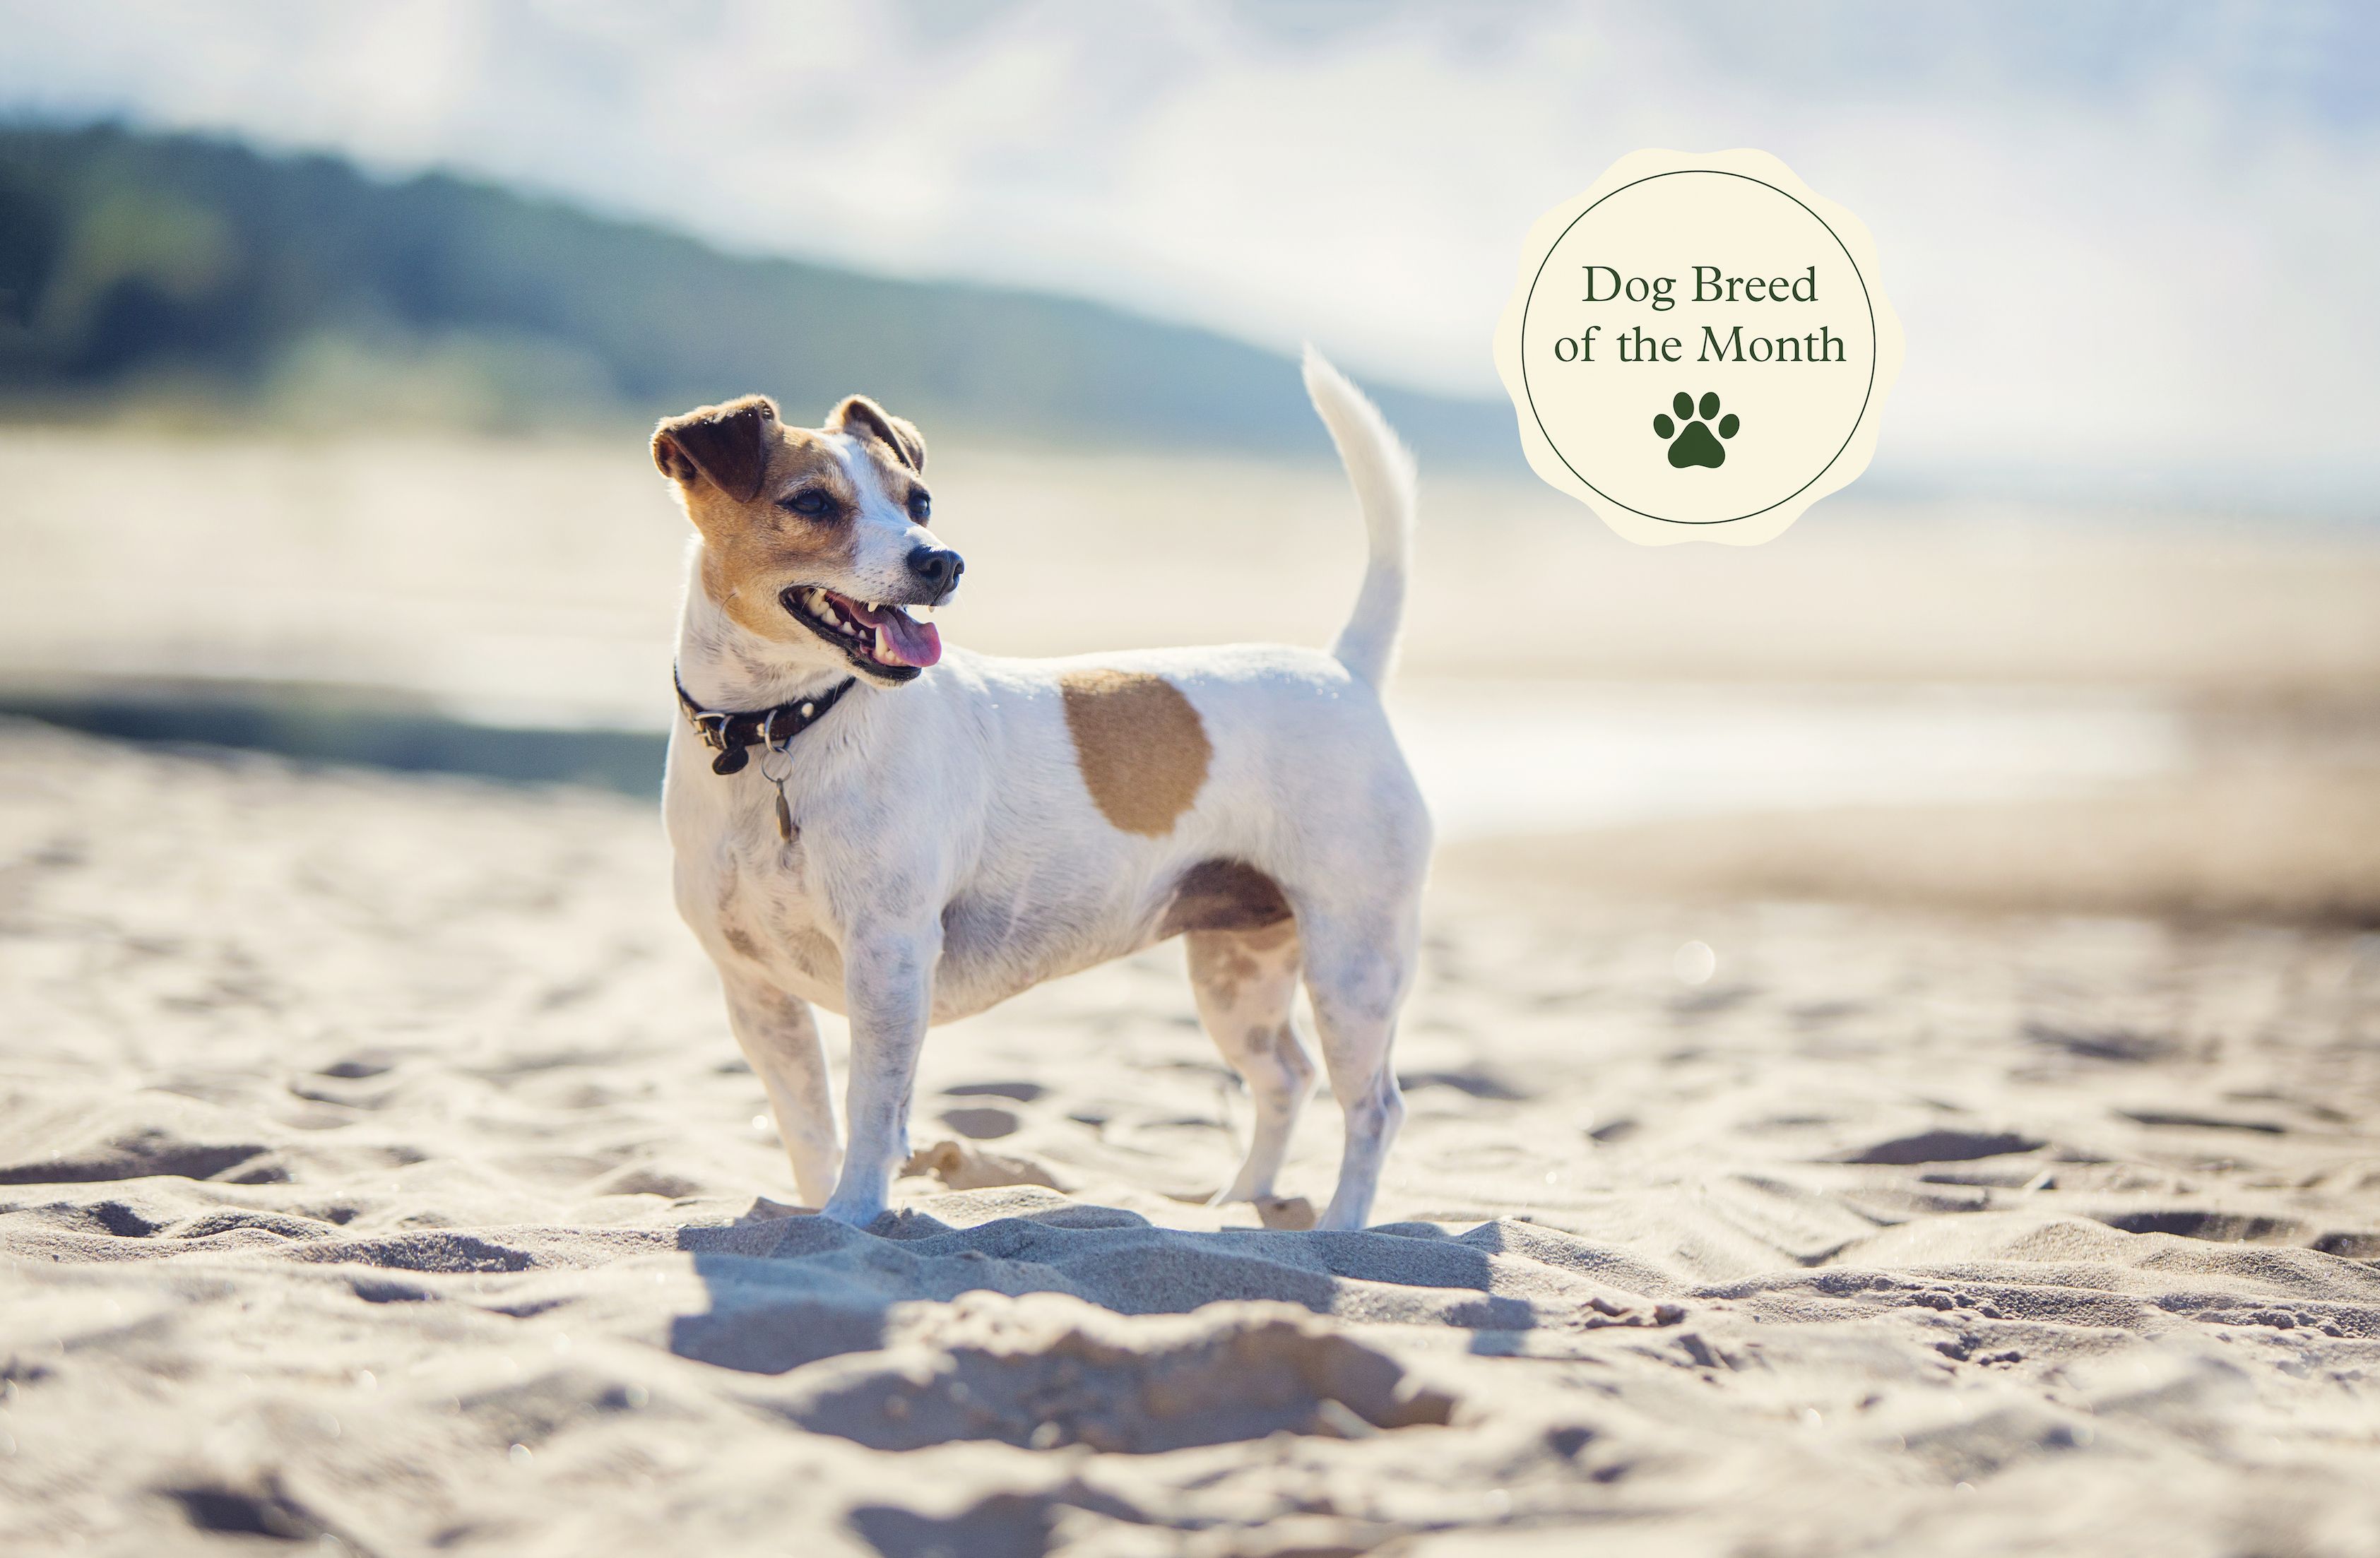 jack russell terrier is a mixed breed